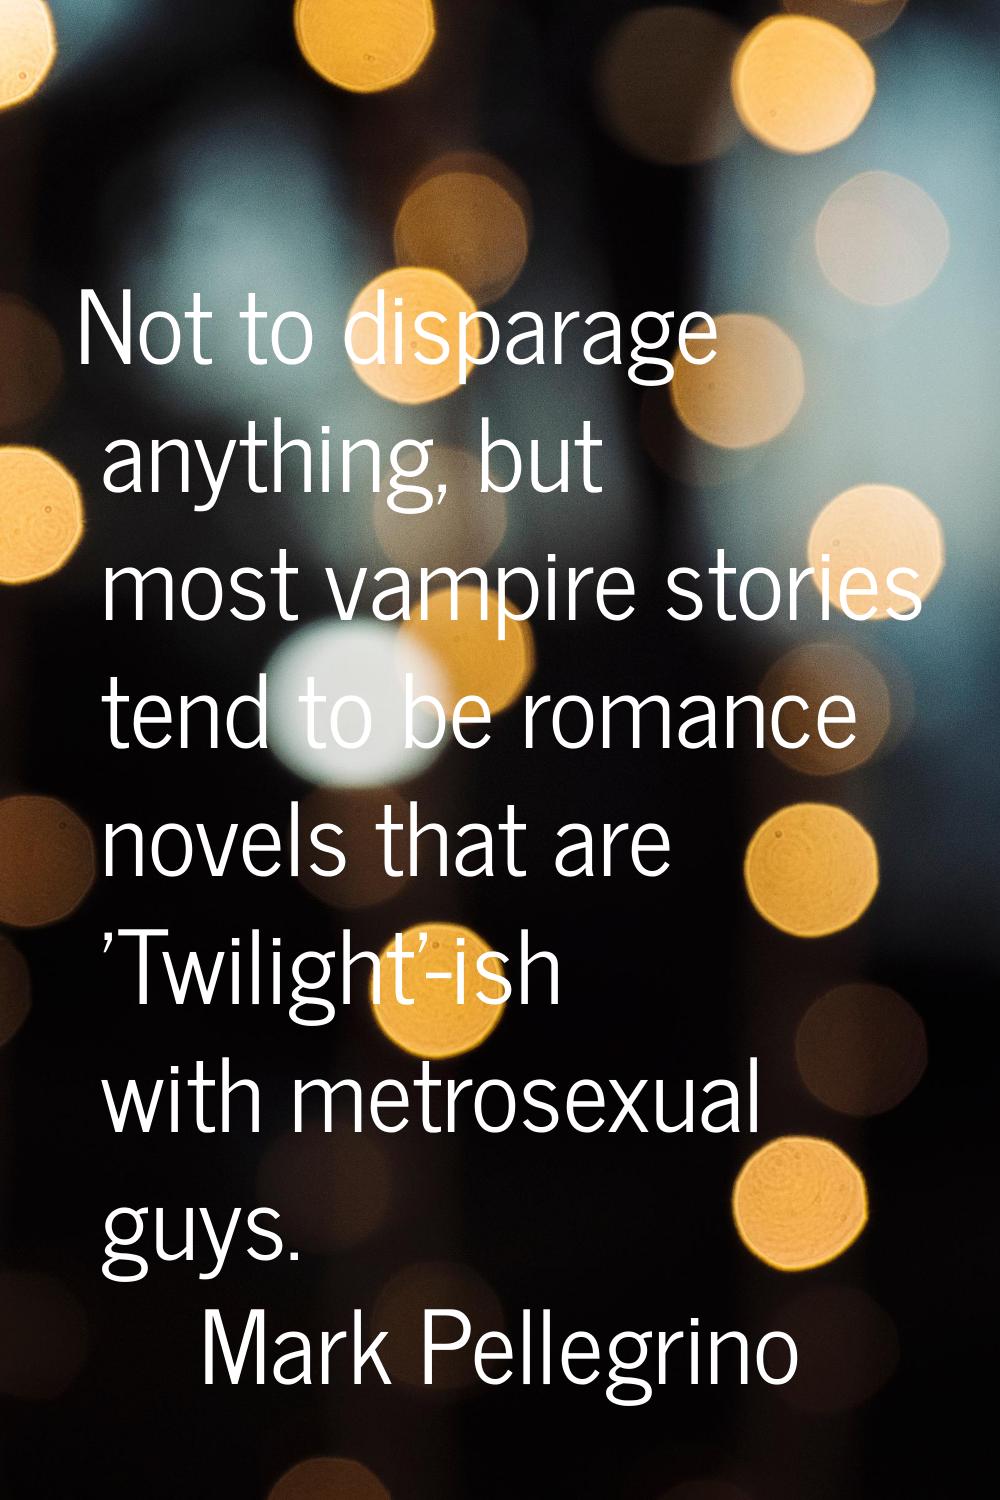 Not to disparage anything, but most vampire stories tend to be romance novels that are 'Twilight'-i